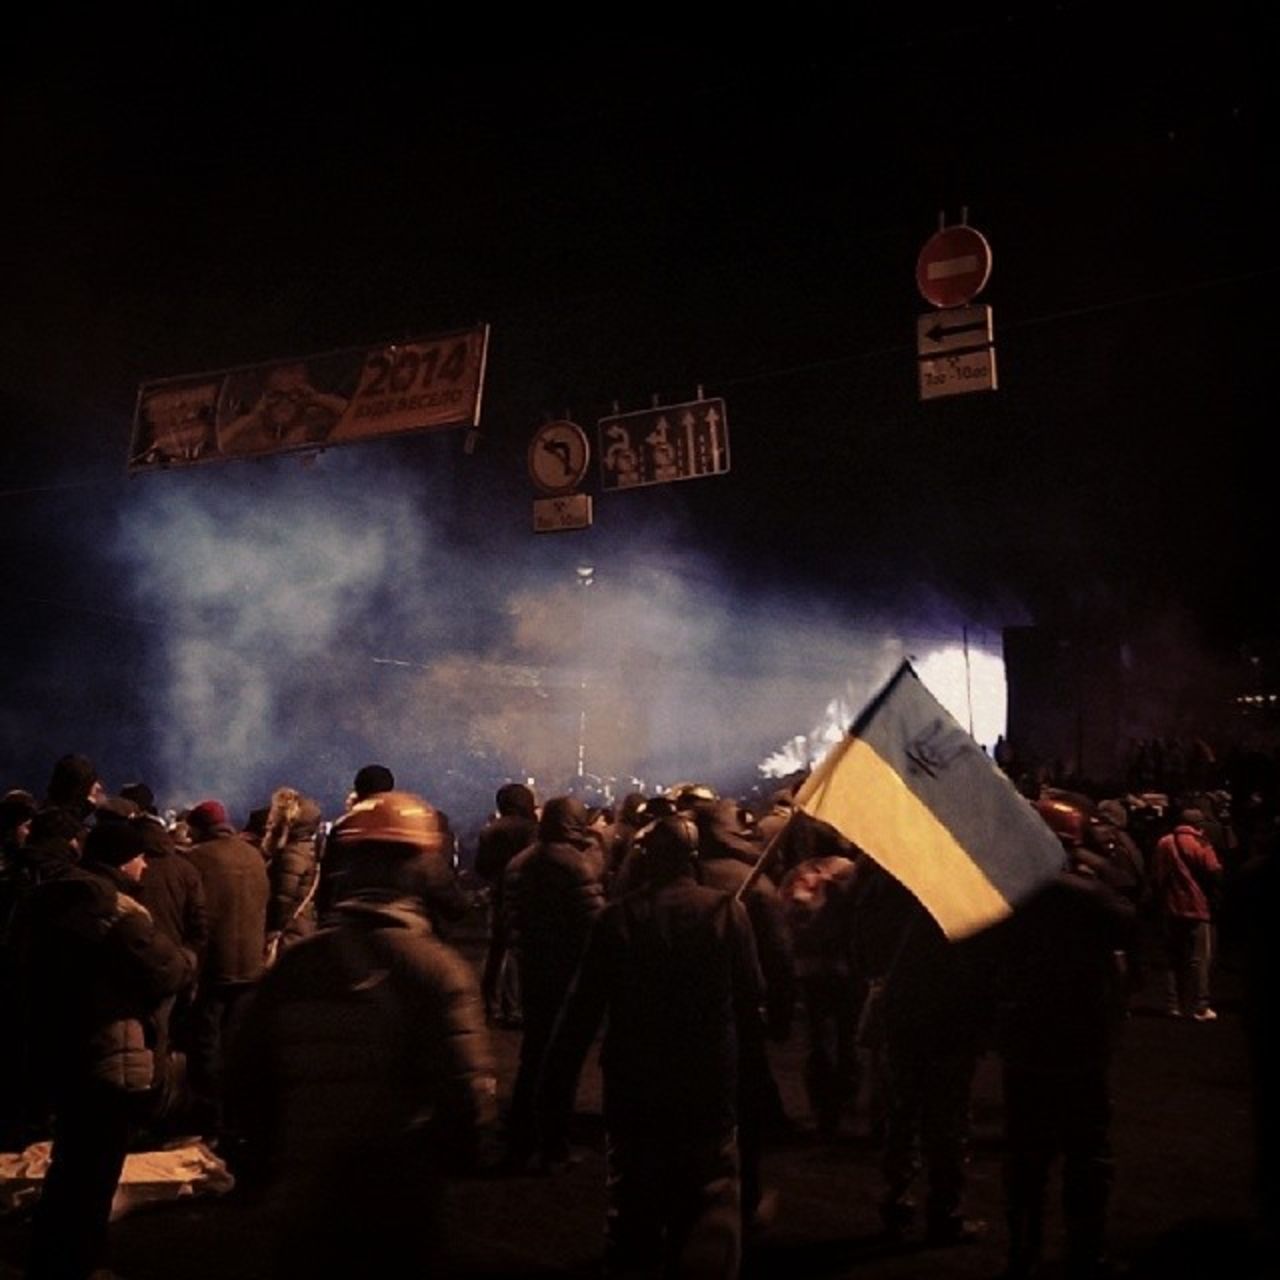 Protests started in reaction to the Ukrainian government's failure to sign a trade agreement with the European Union, which many interpreted as a turn away from Europe and toward Russia instead.